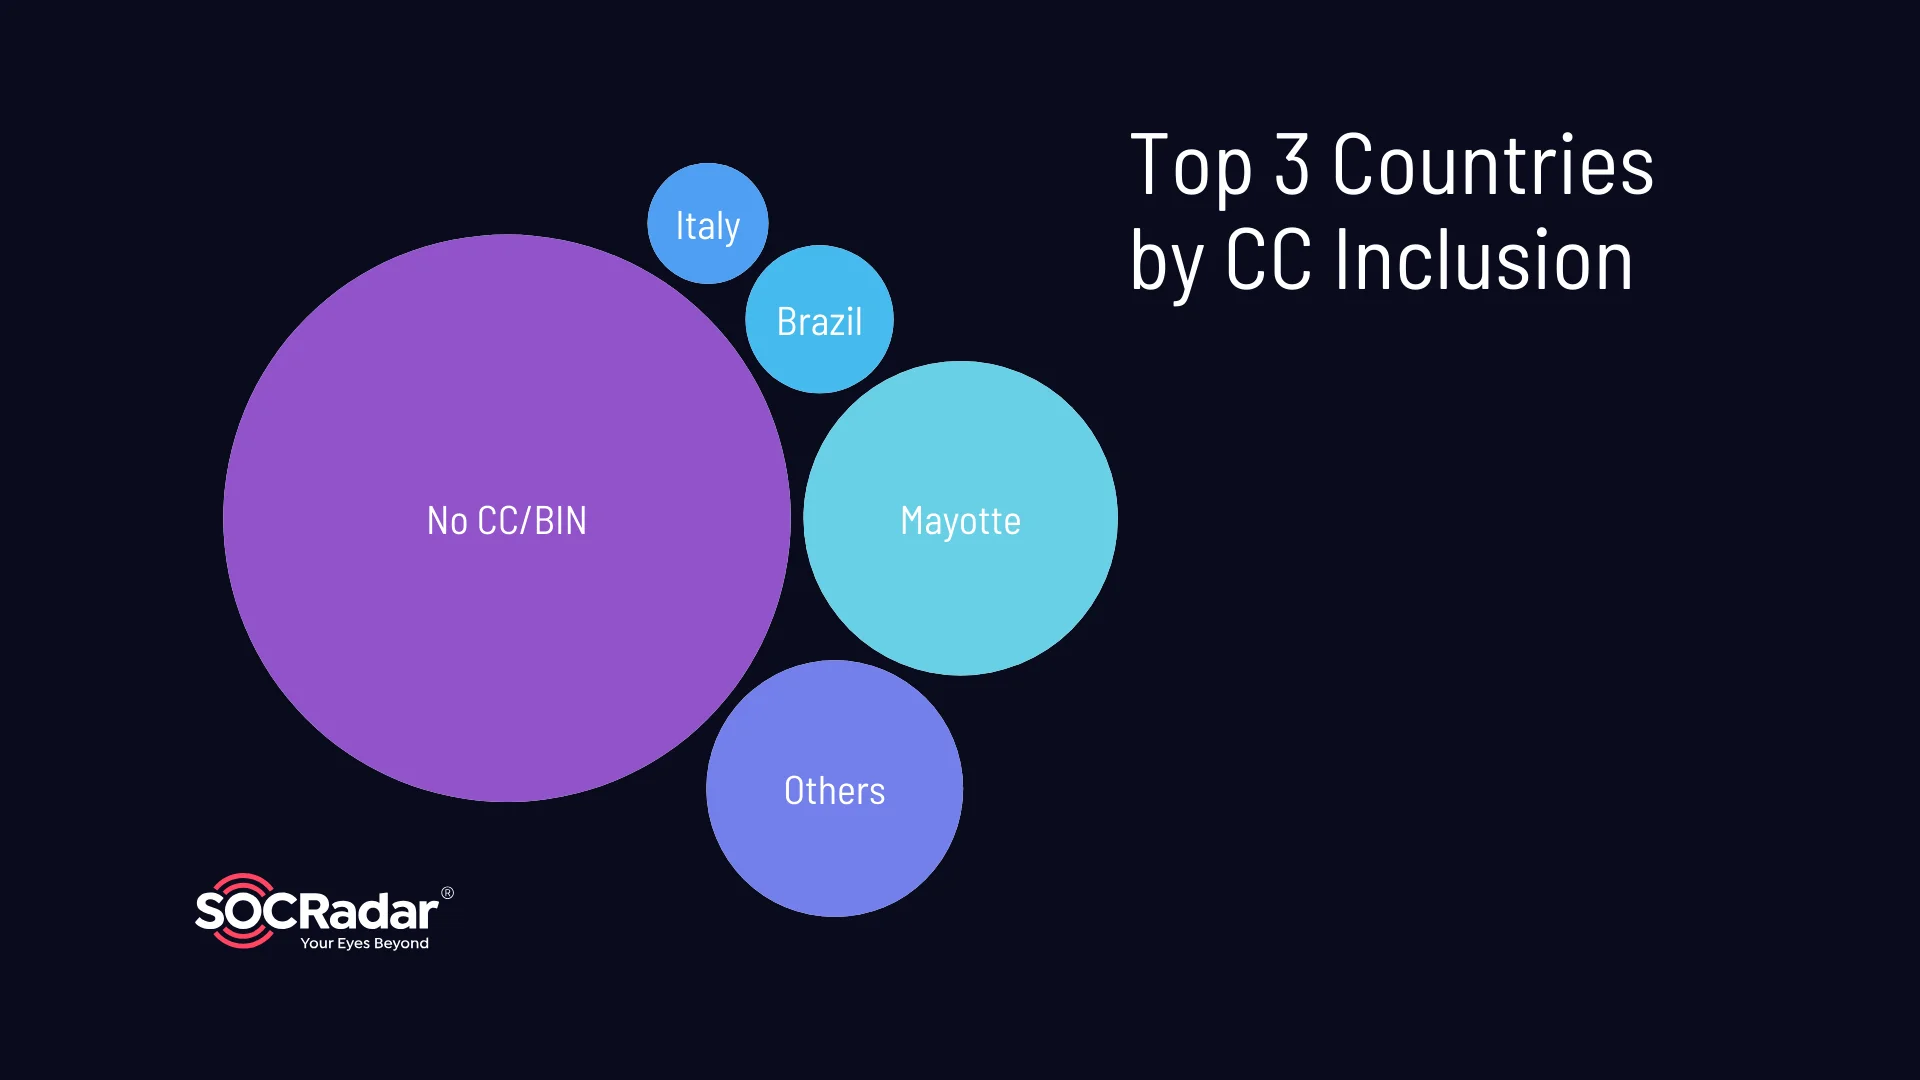 Top 3 countries by CC/BIN inclusion